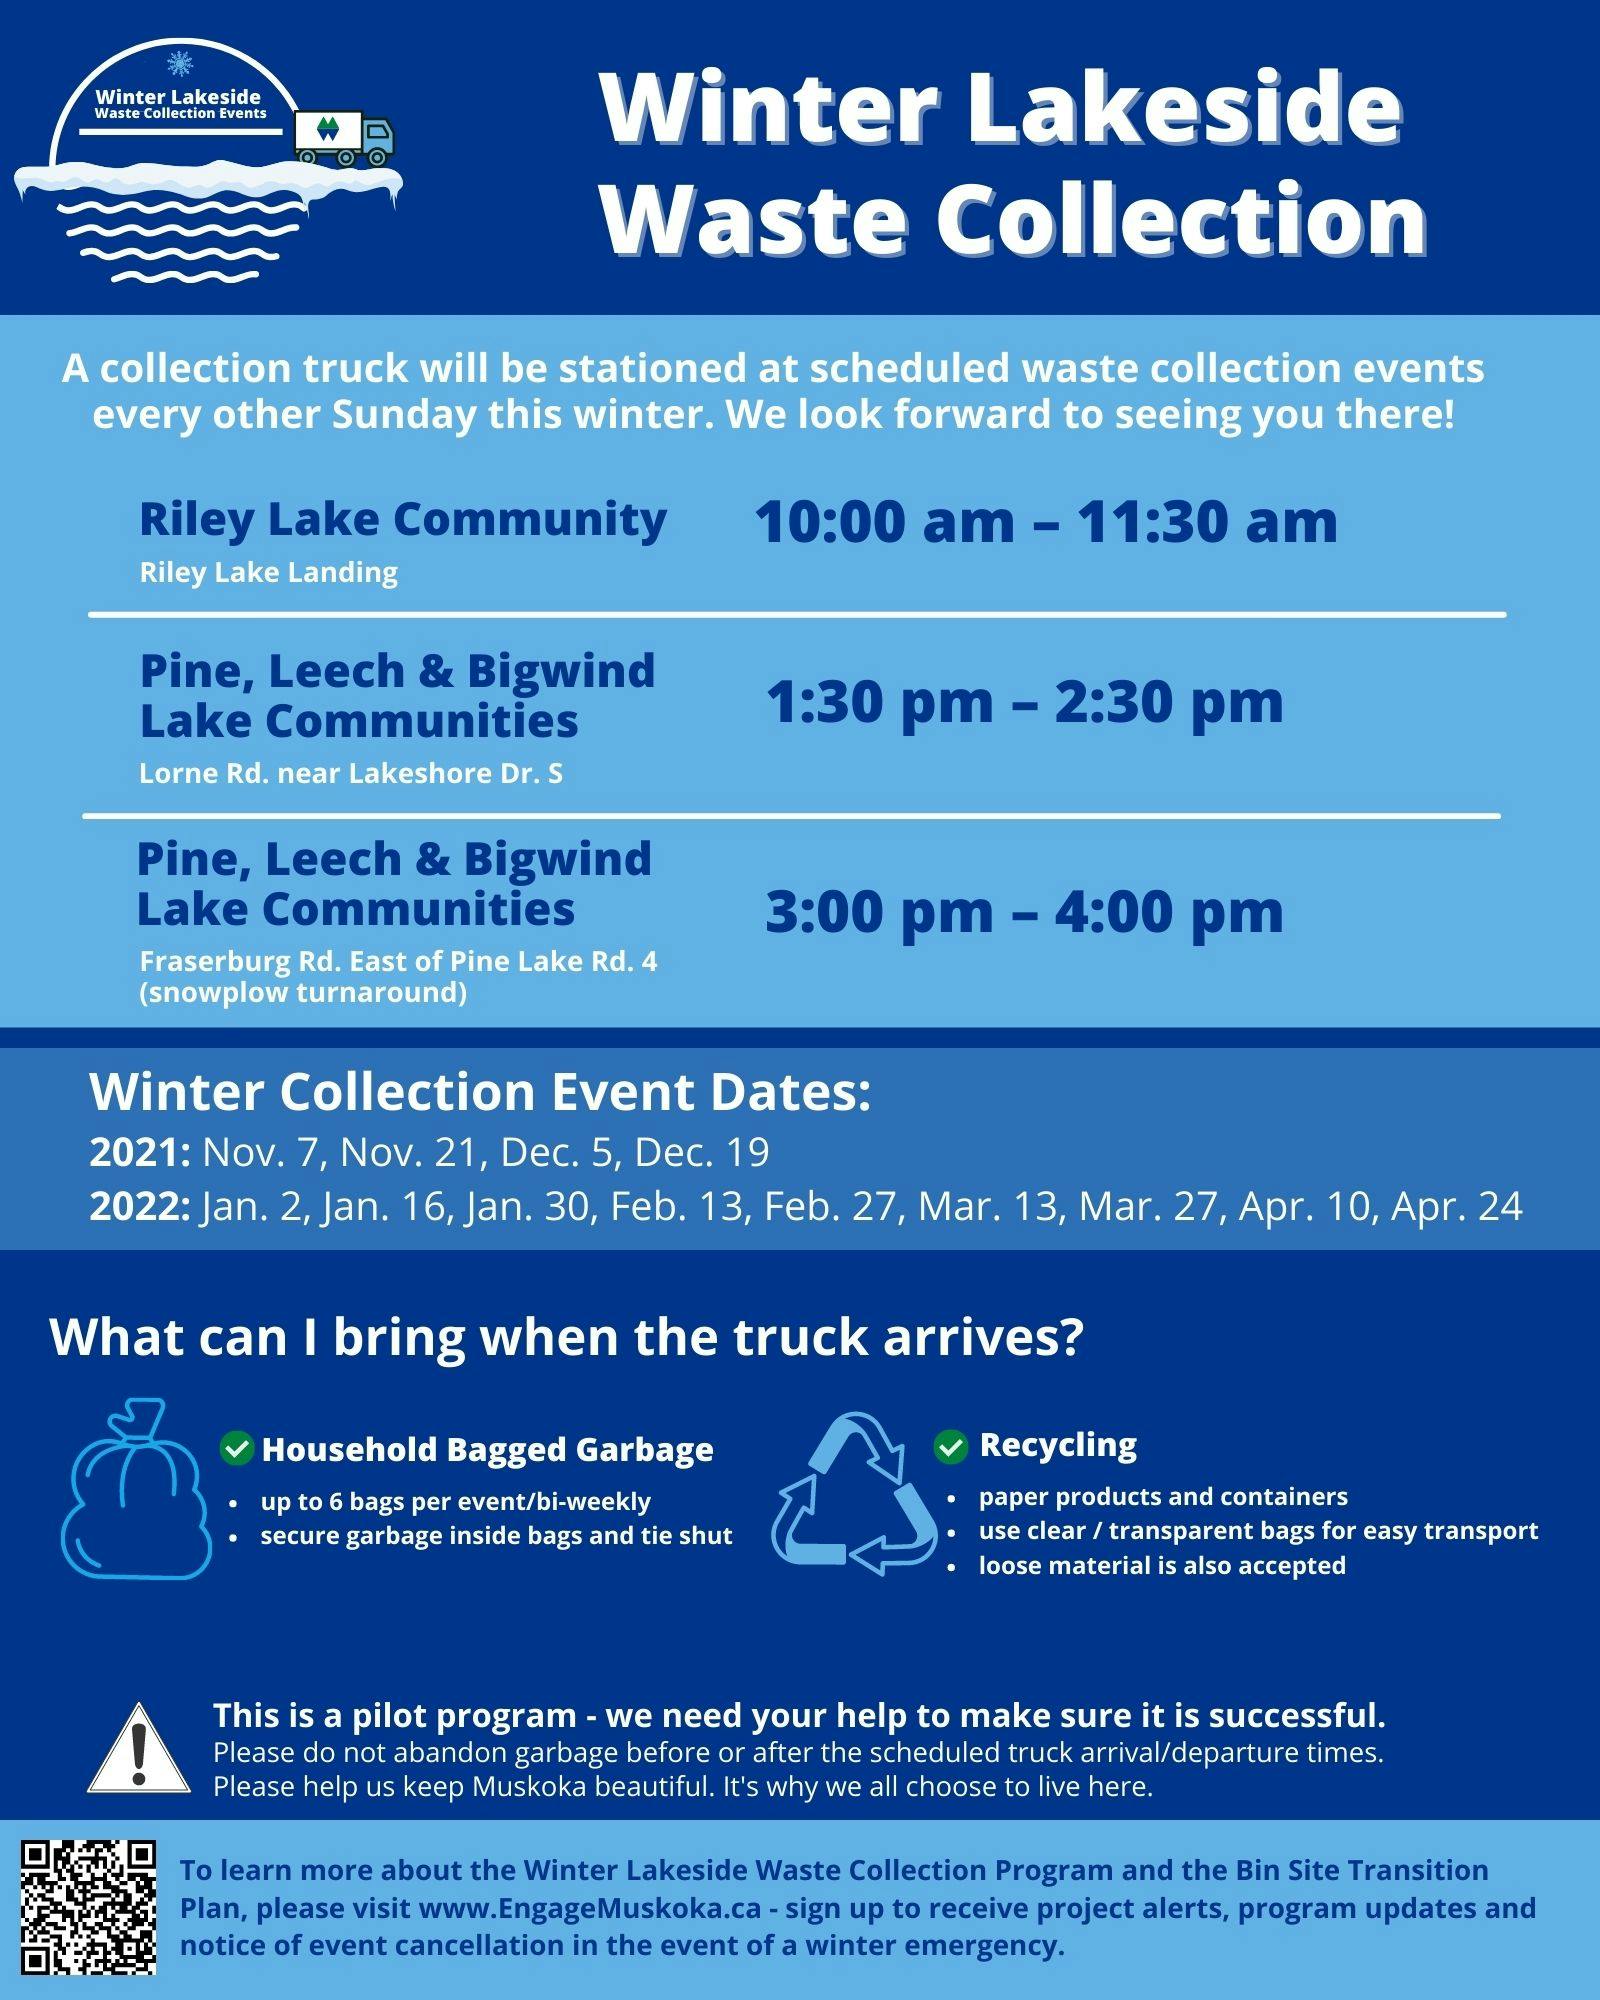 Winter Lakeside Waste Collection Schedule.jpg